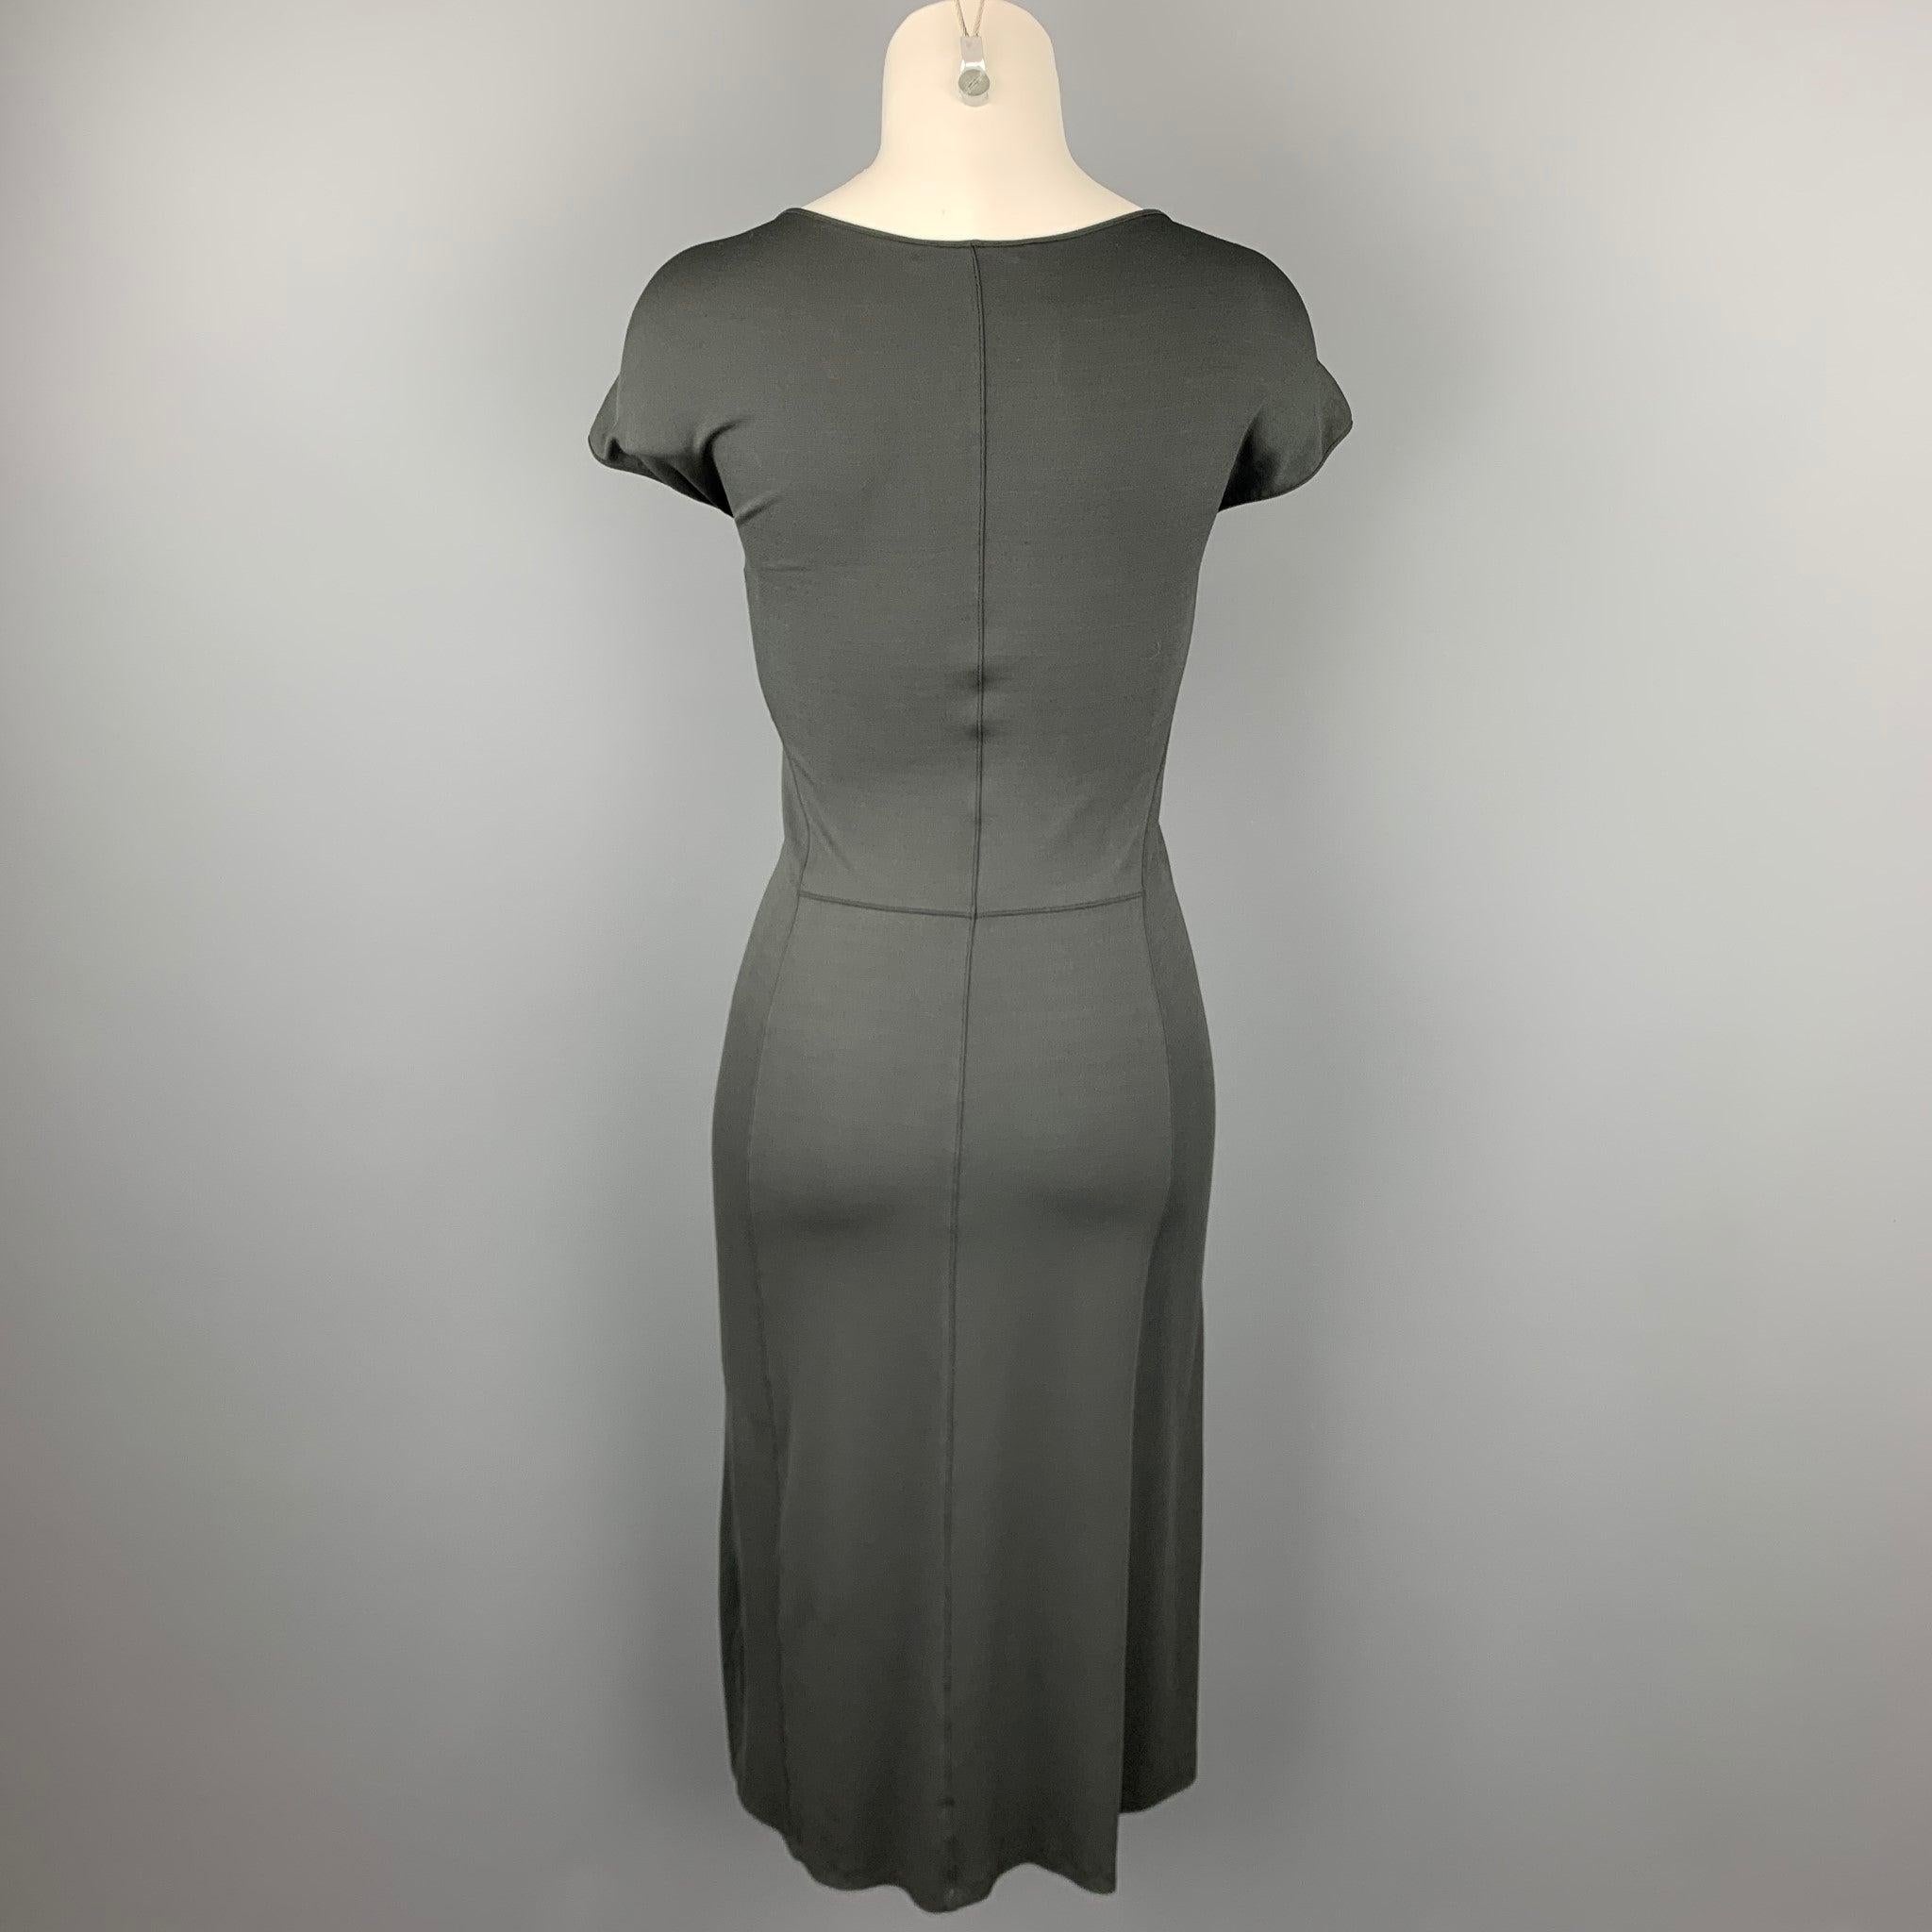 Women's NARCISO RODRIGUEZ Size 8 Grey Jersey Rayon Blend A-Line Dress